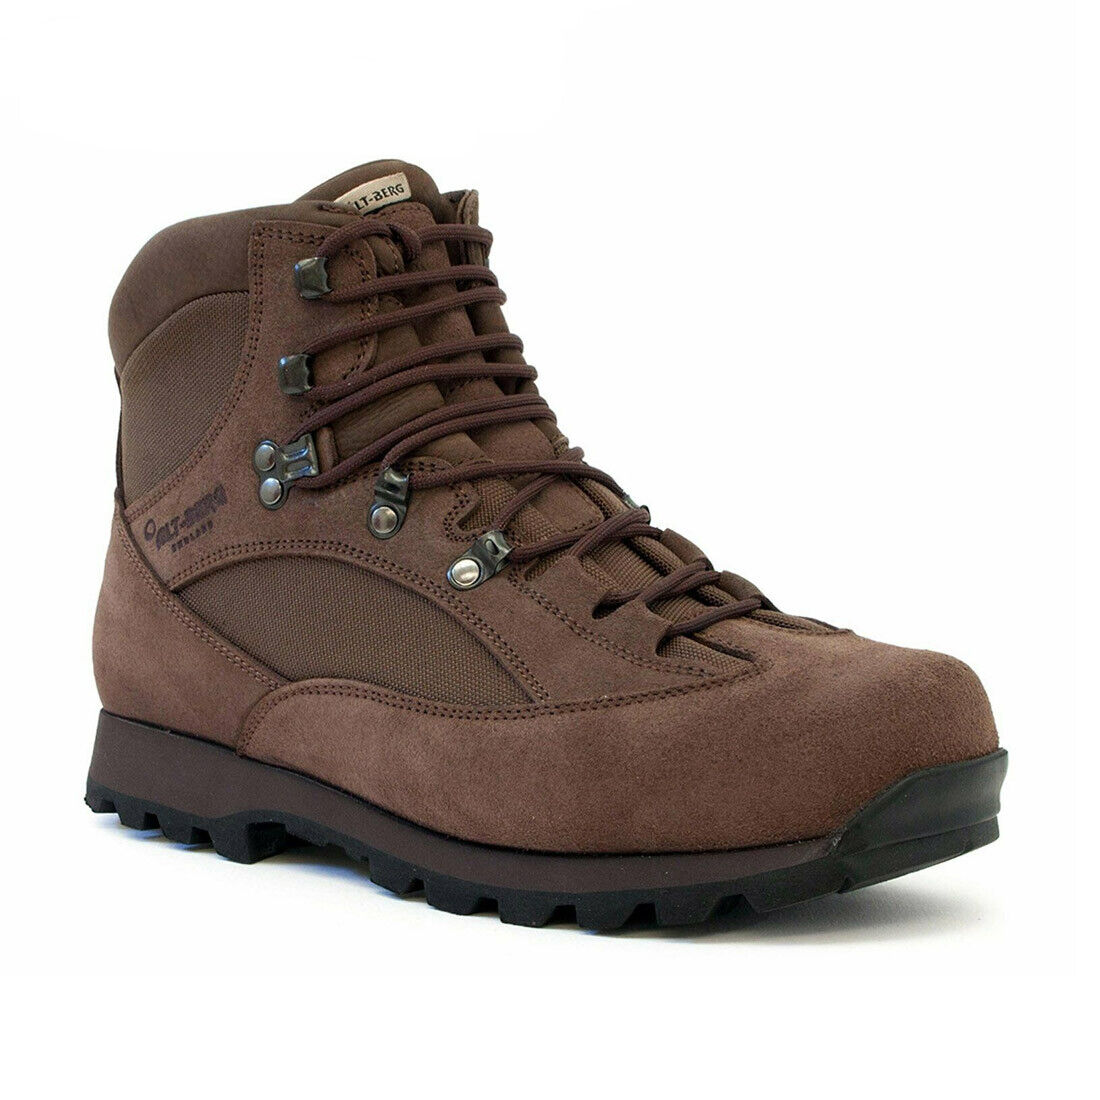 ALTBERG MILITARY BASE BOOT MK 2 (2019) Size 6 to 13